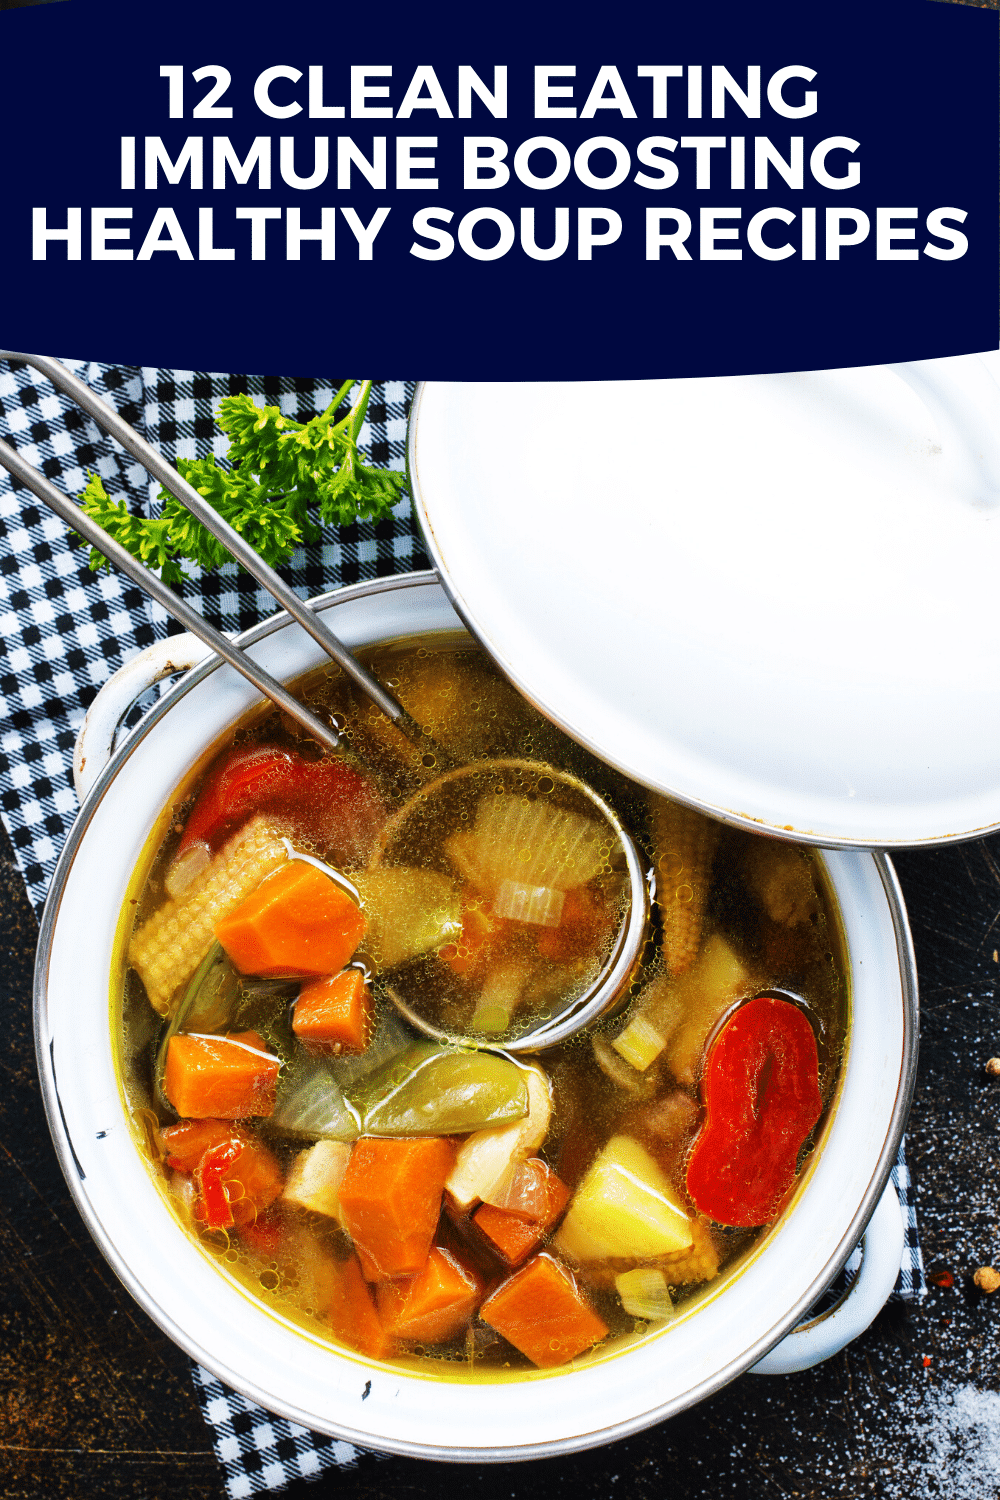 12 Healthy Immunity Boosting Soup Recipes That Stop A Cold Fast